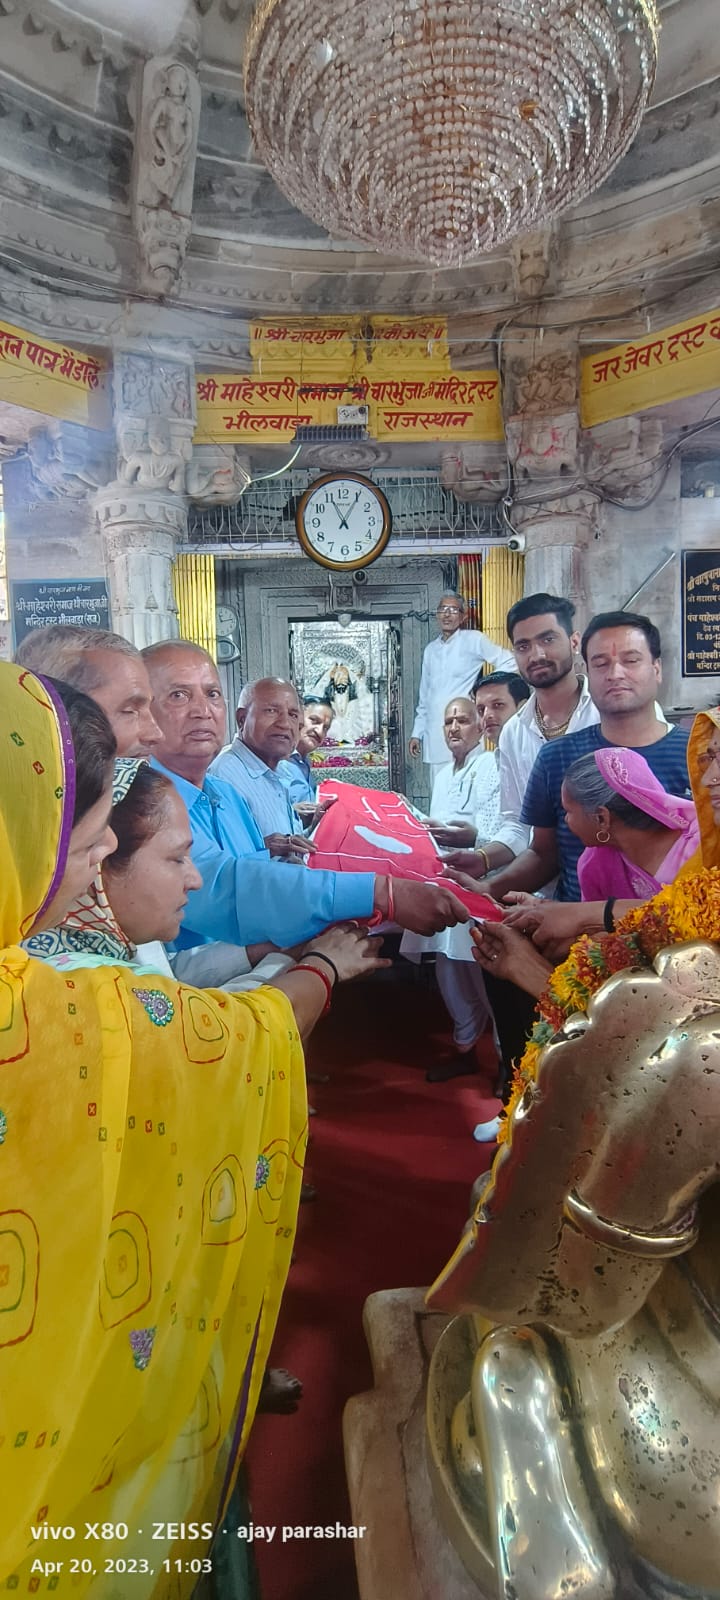 Charbhuja Nath's flag offering was organized